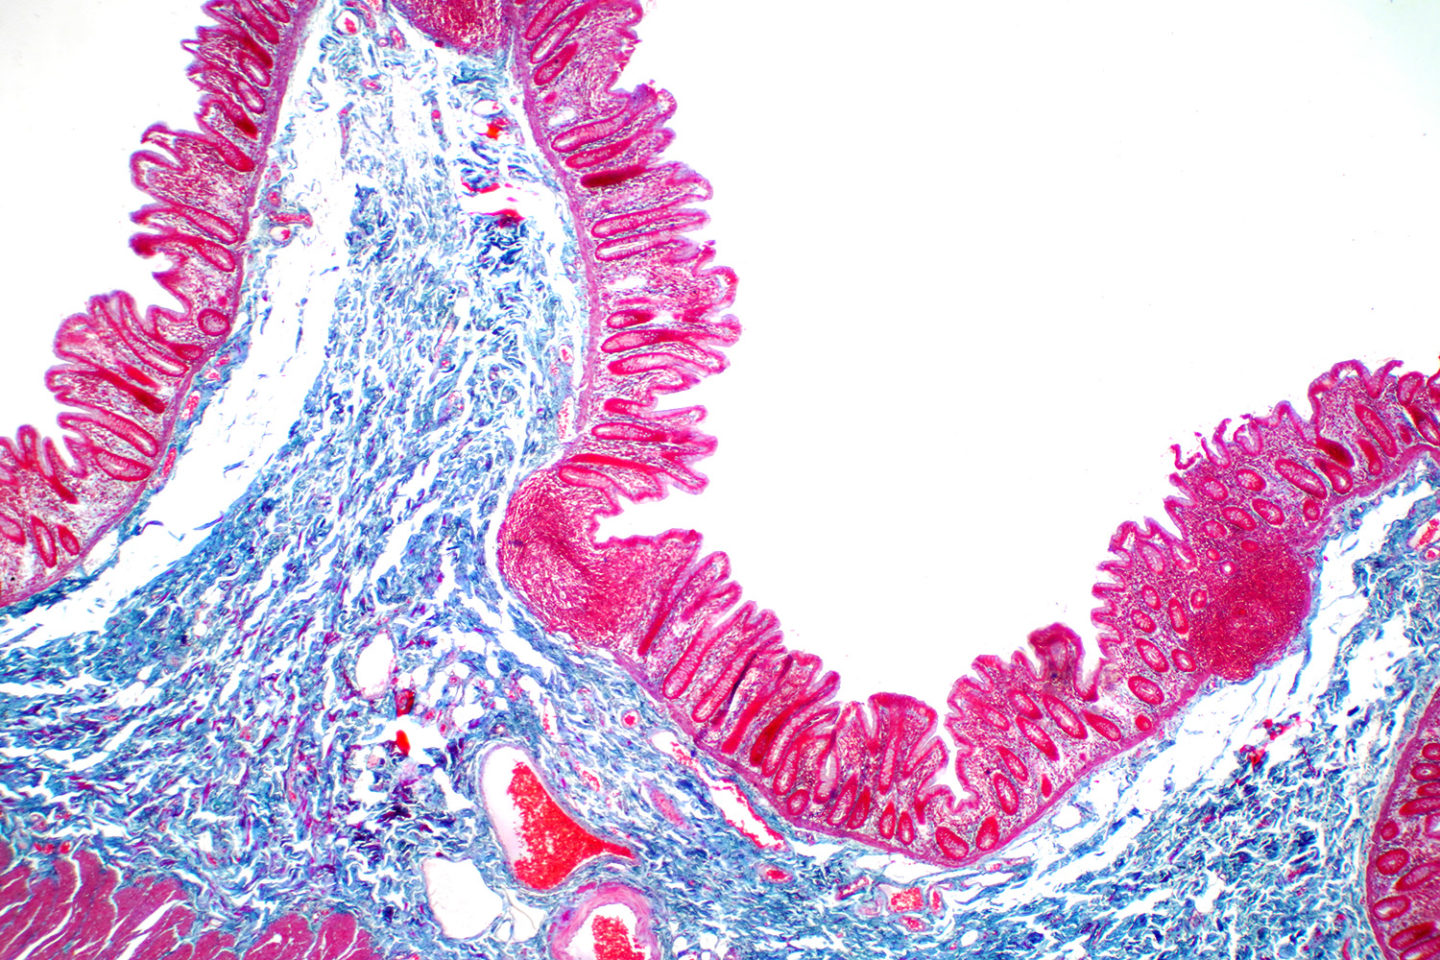 Intestinal Villi And Crypts Photo (c) Shutterstock Small